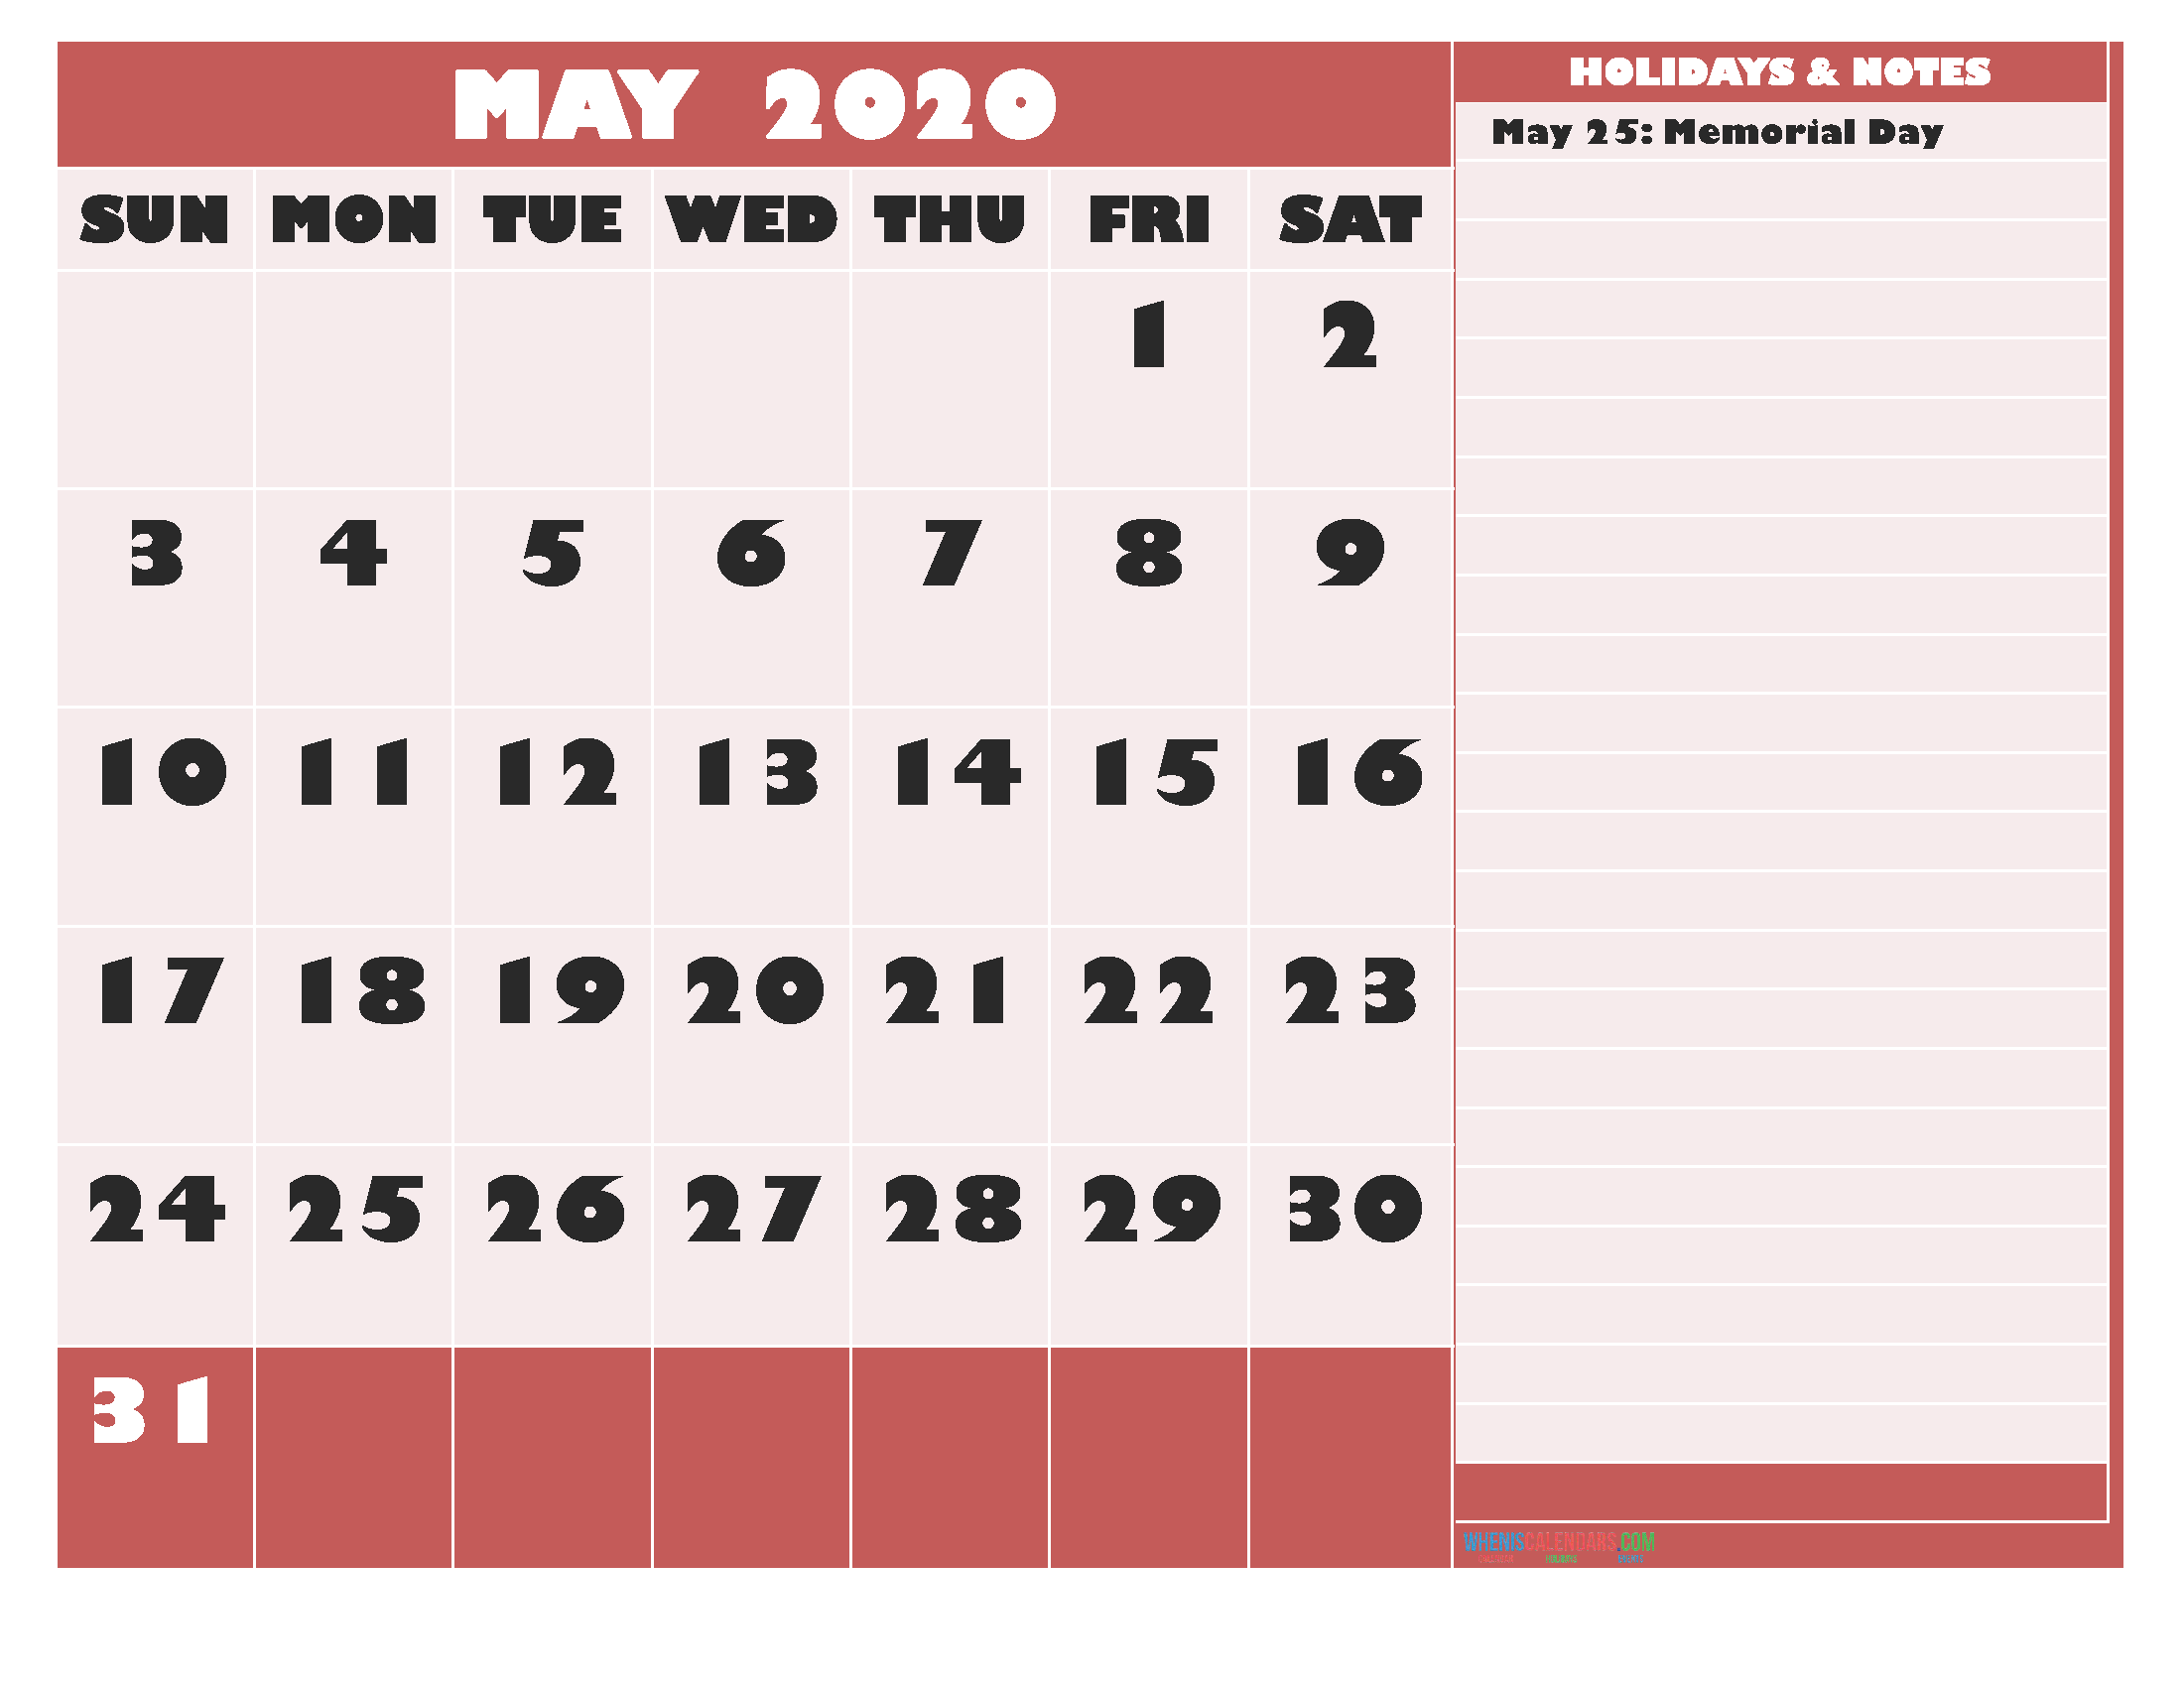 Free Printable Monthly Calendar 2020 May with Holidays